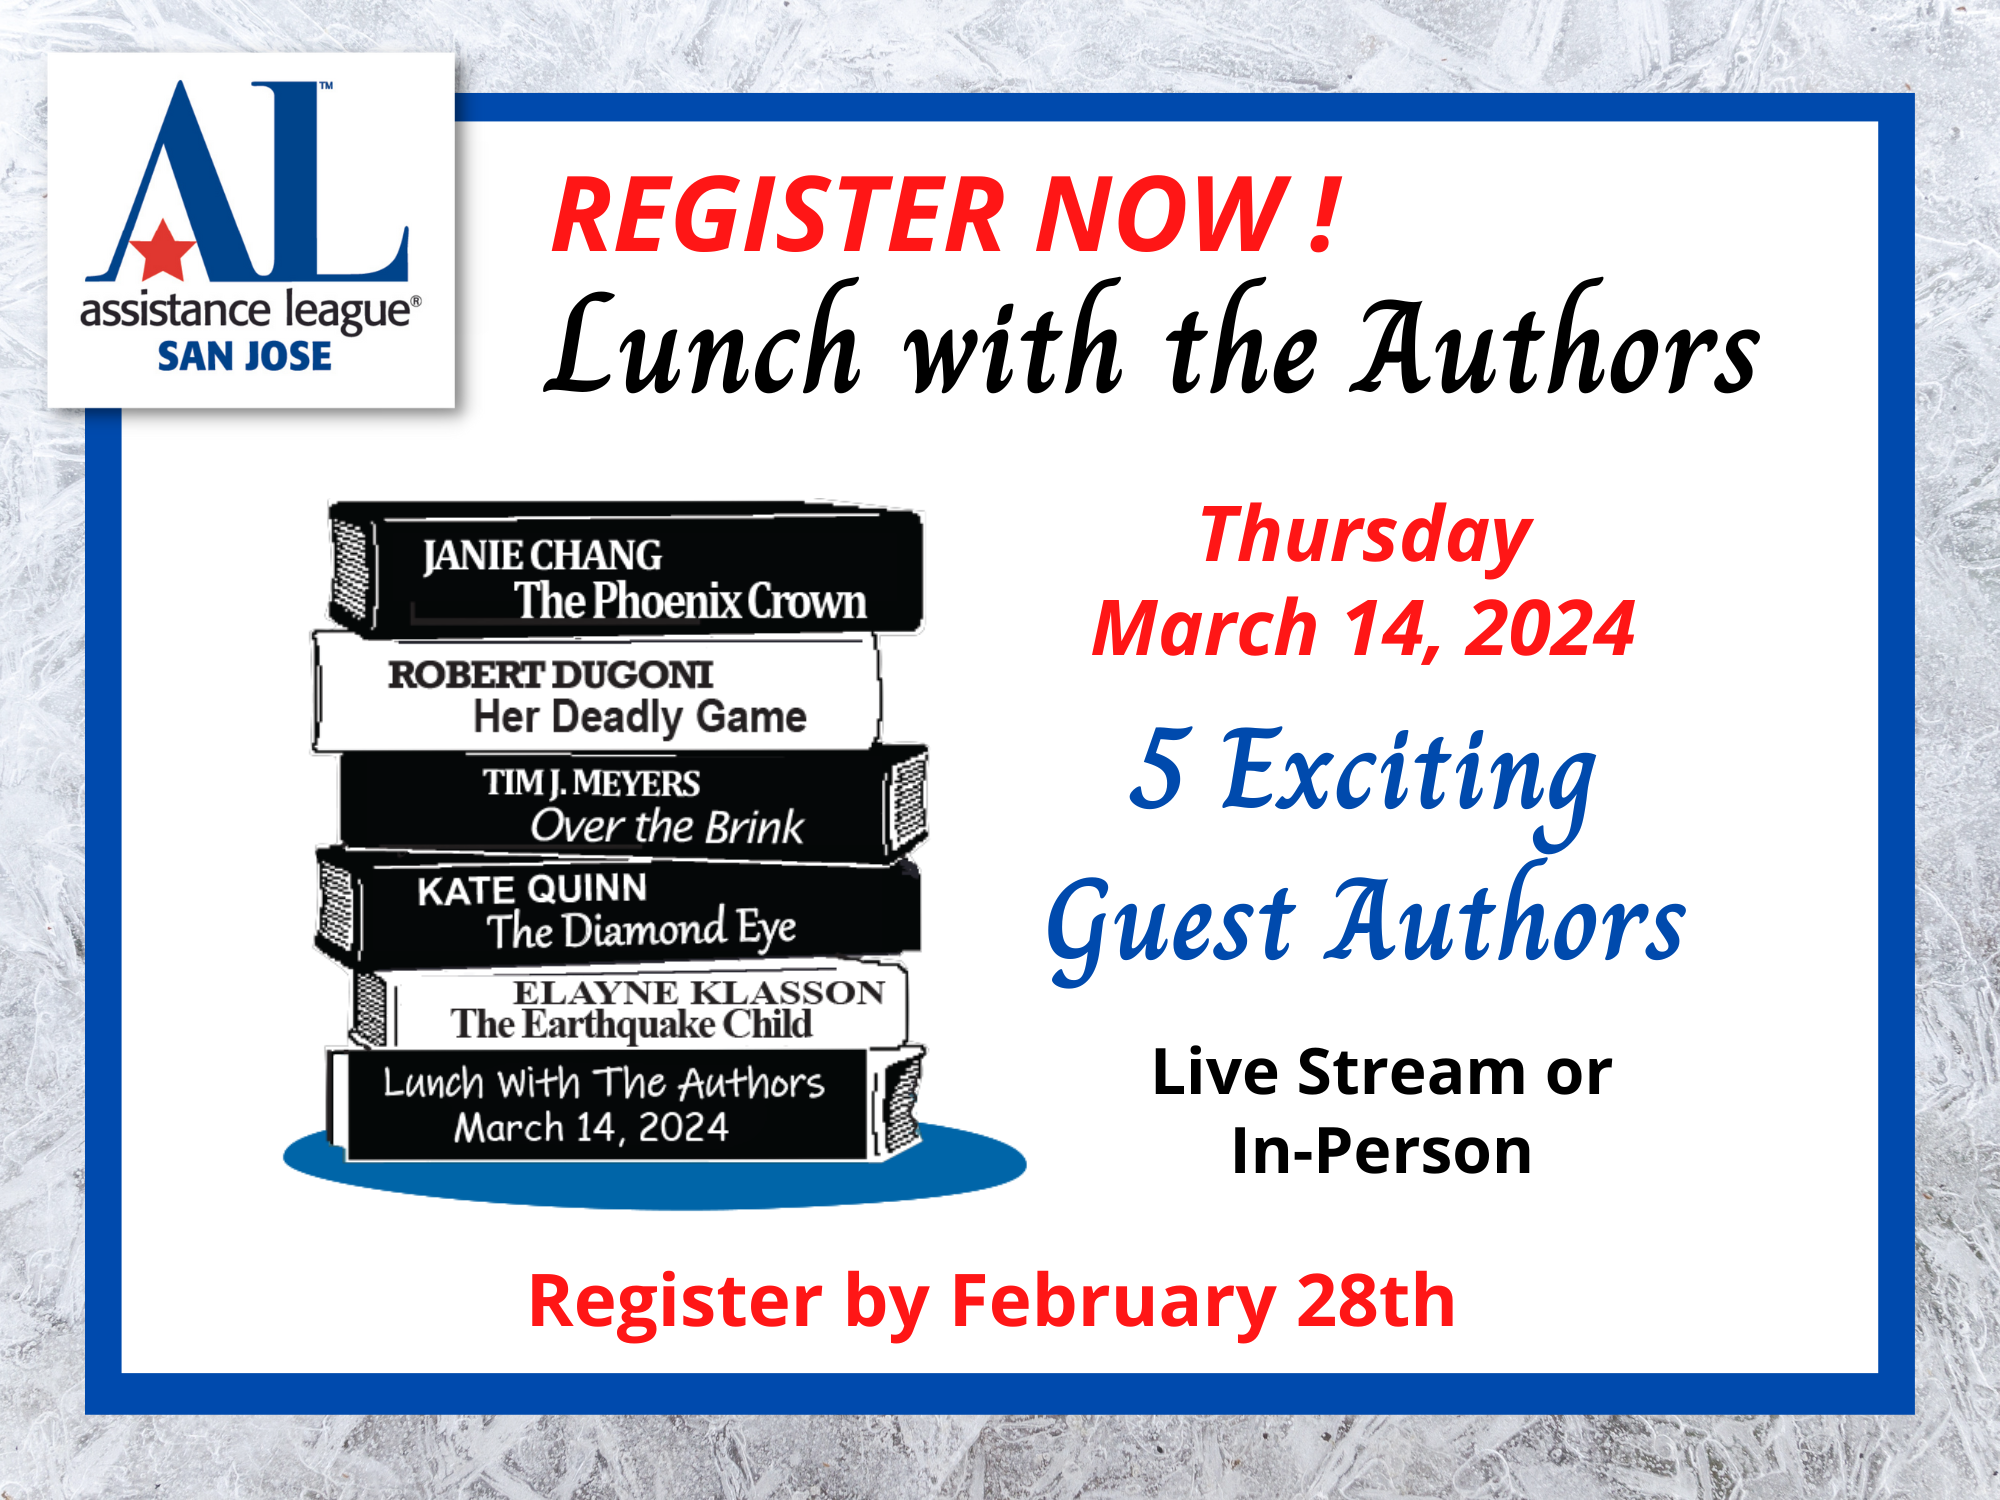 Lunch with the Authors March 14, 2024